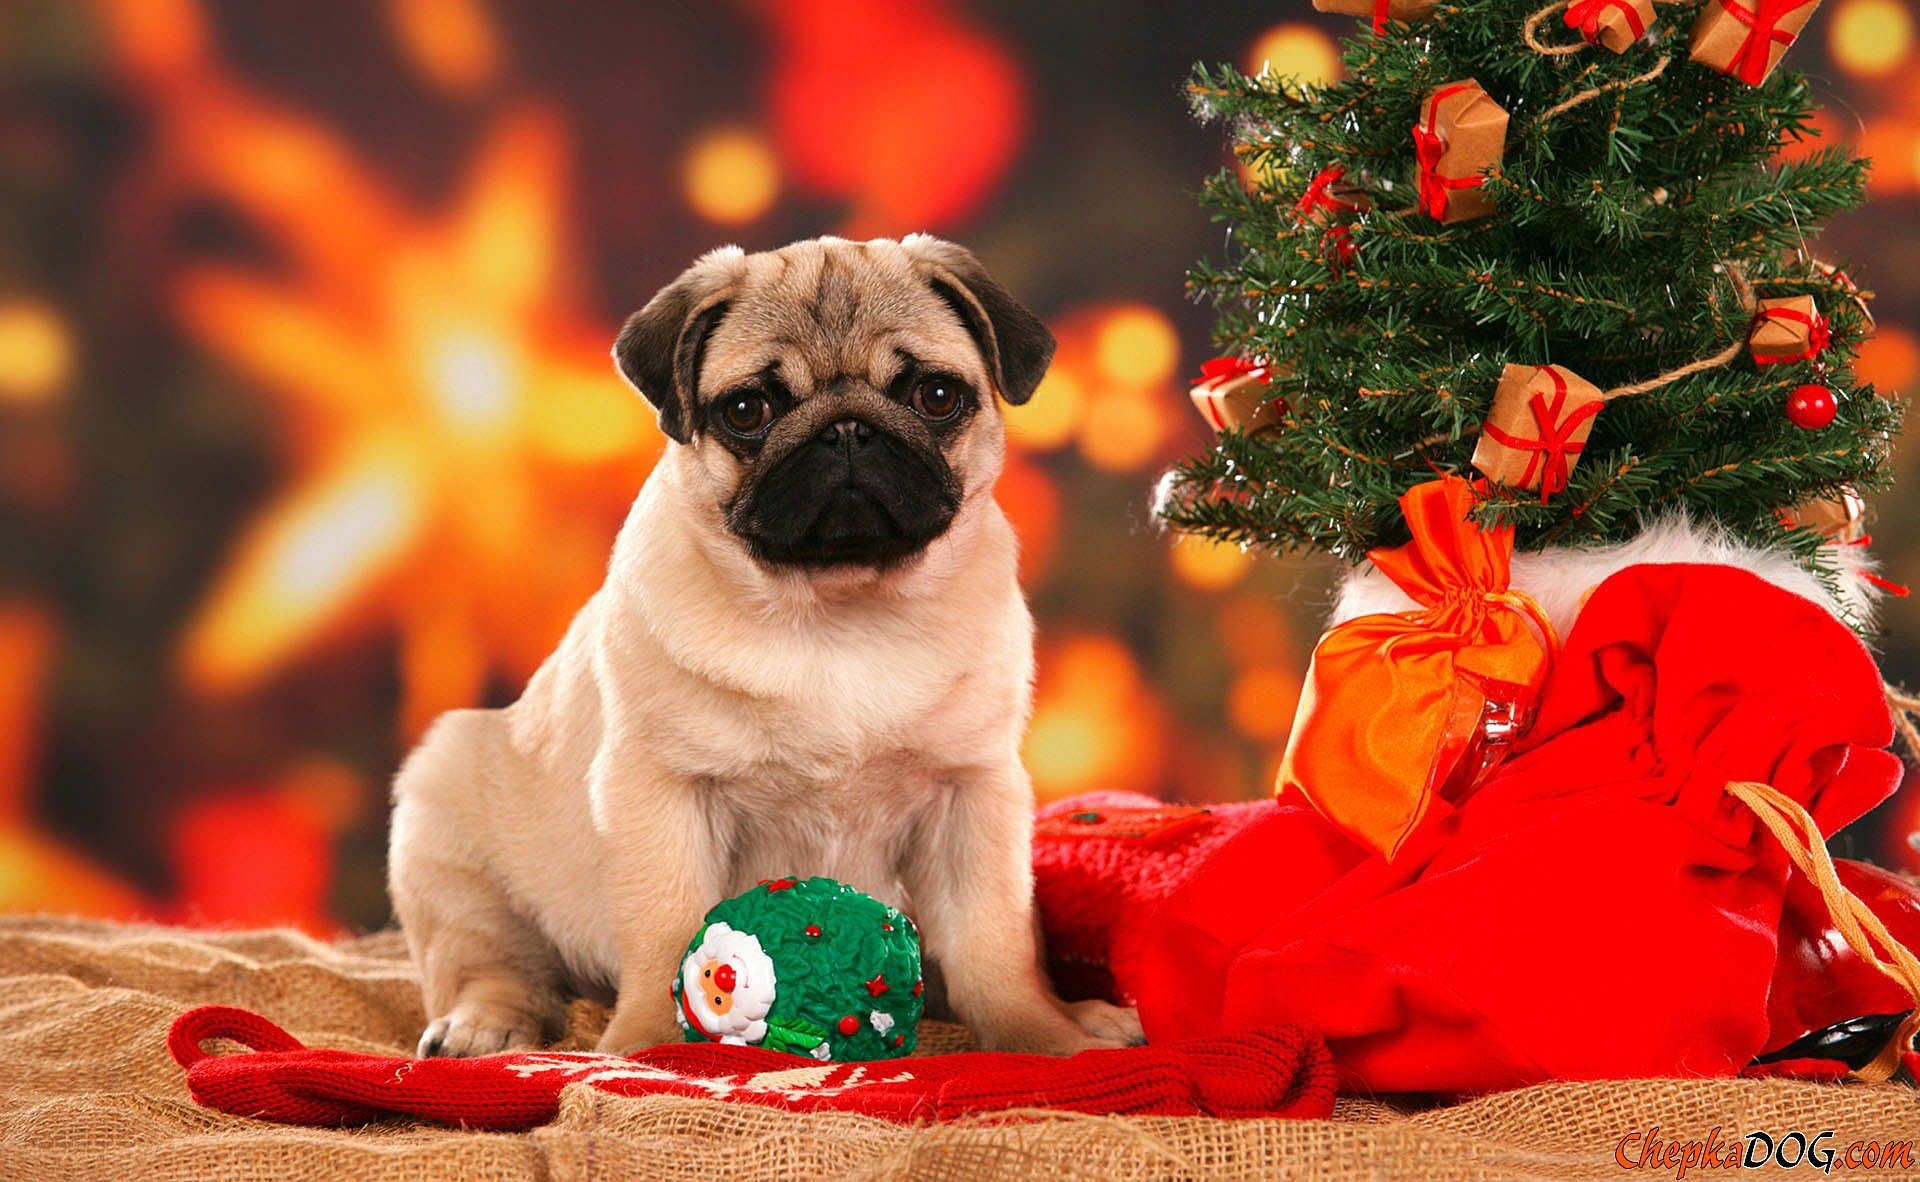 1920x1182 Download your favorite Christmas dogs wallpaper from our list. Dogs are  very happy during Holiday time, especially in Christmas, because they can  feel the ...